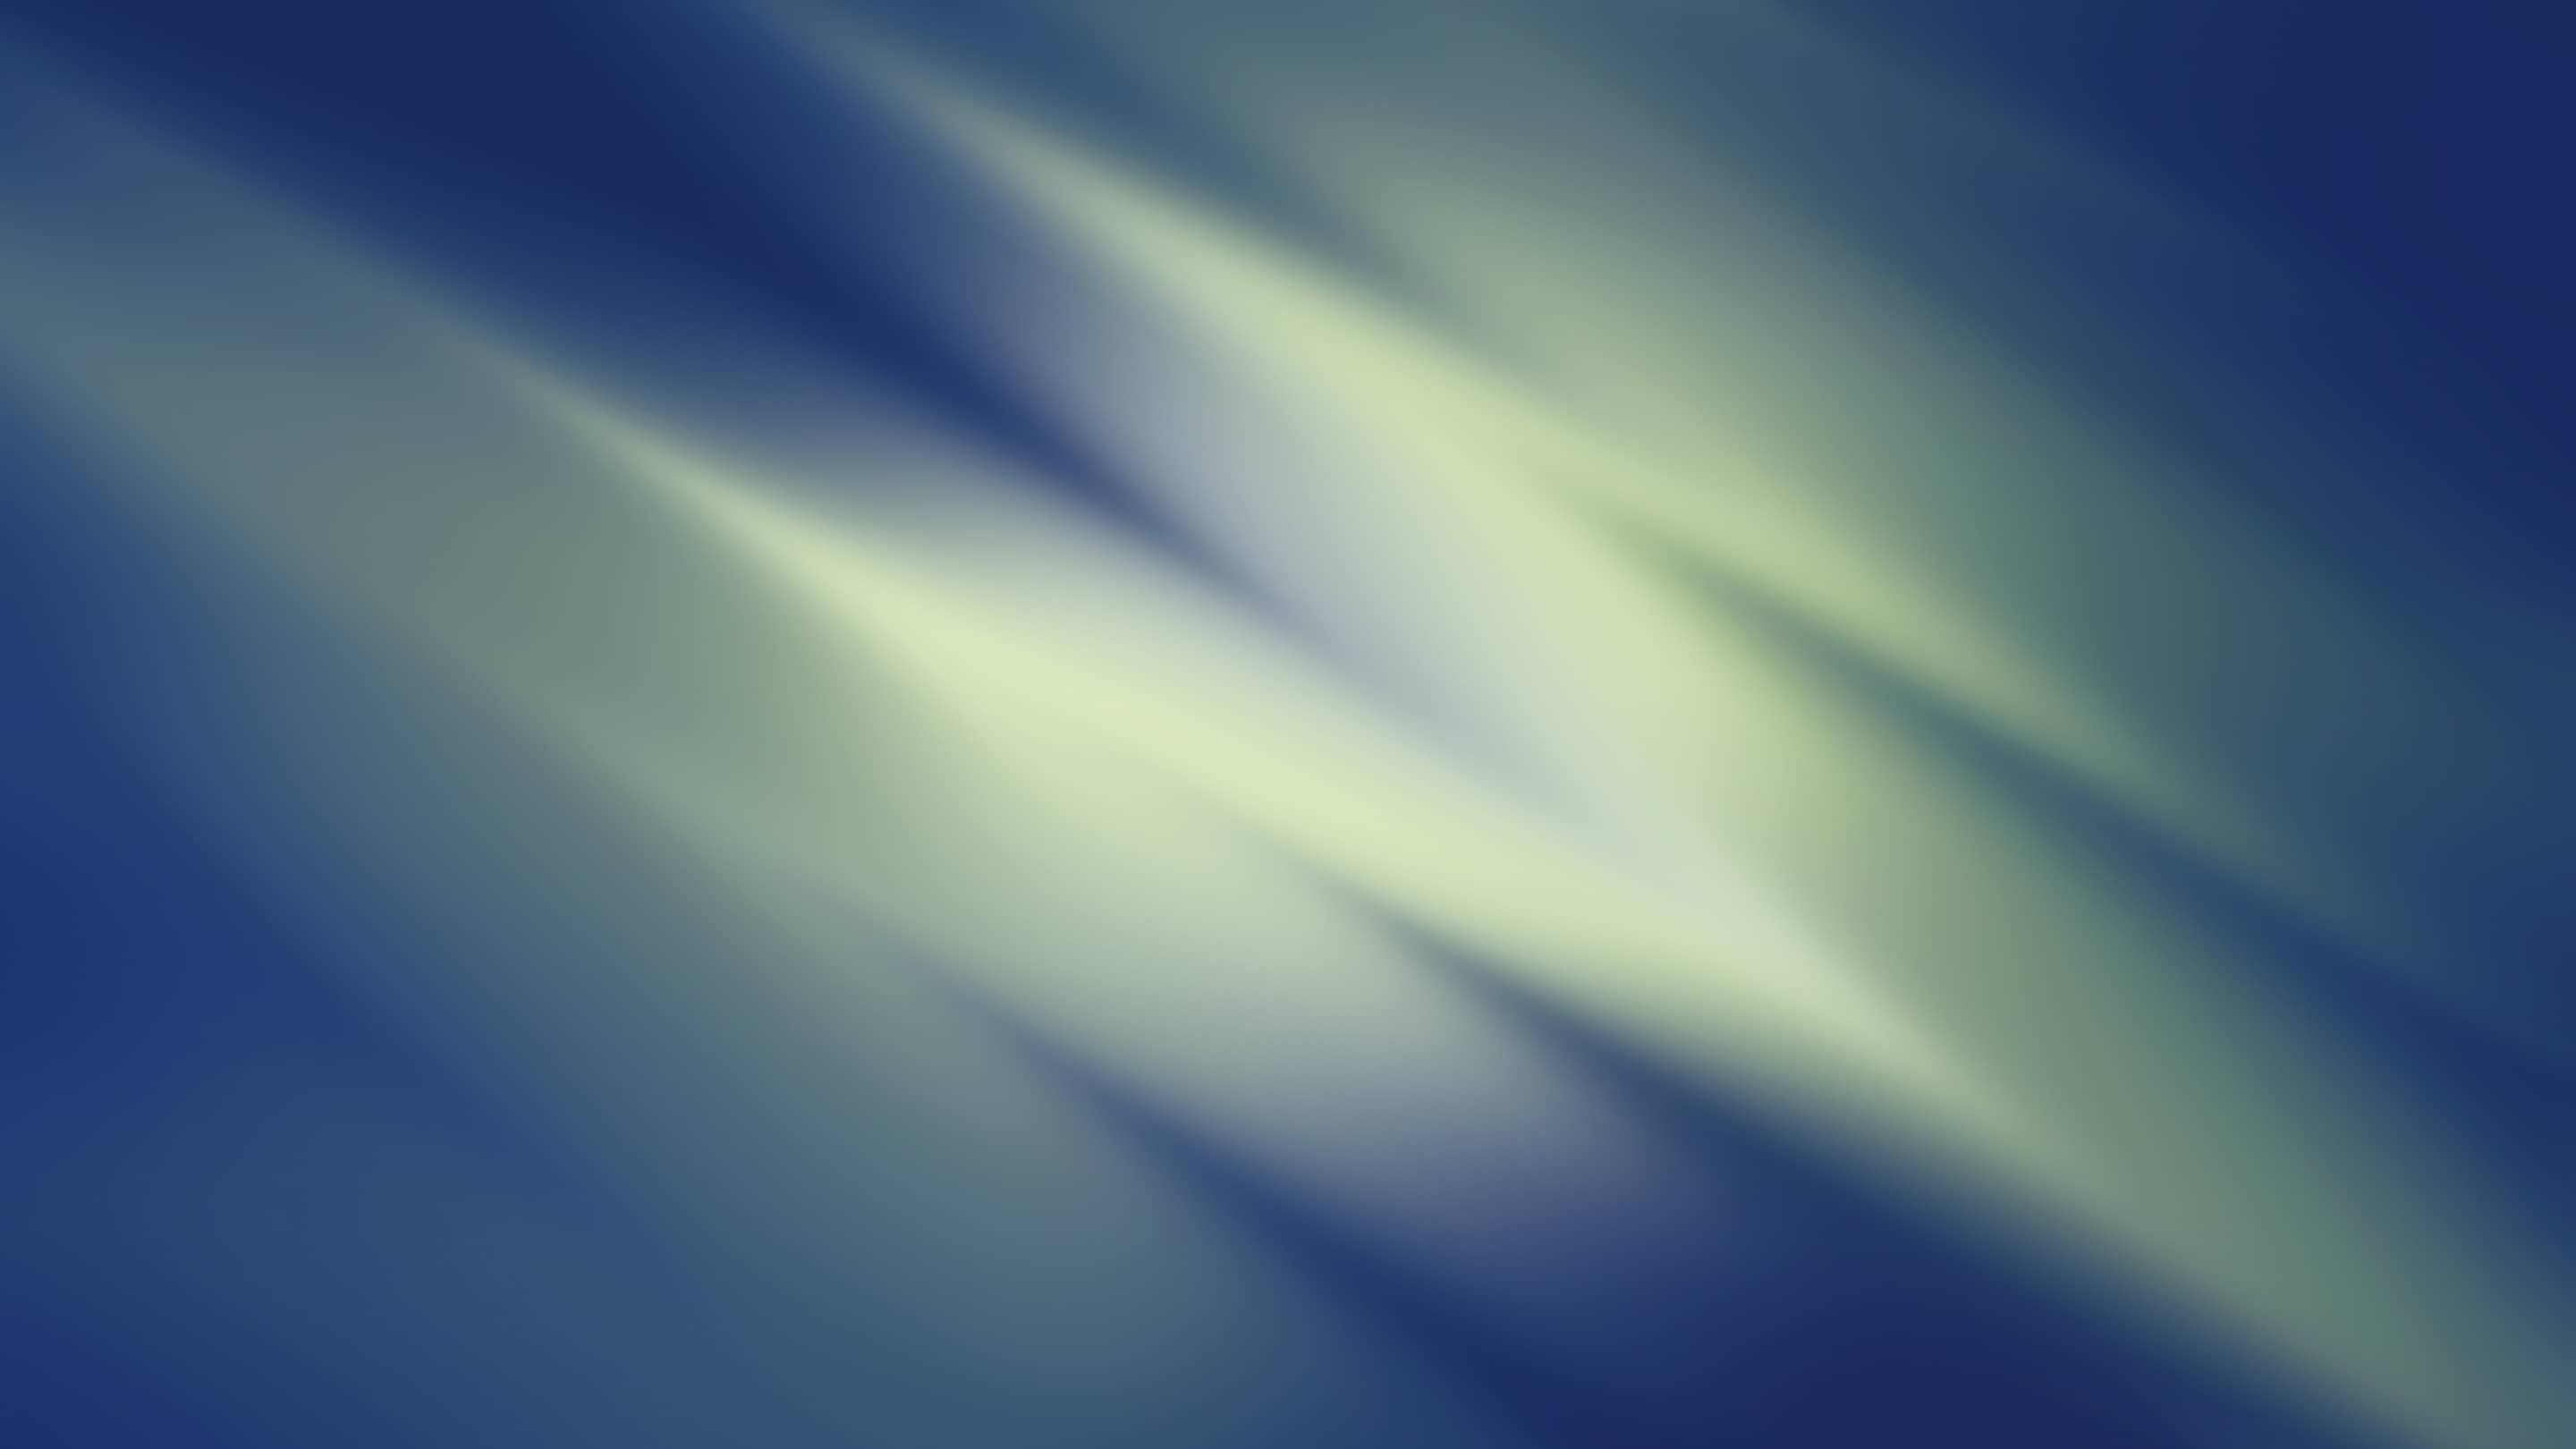 A blue and green blurred background.